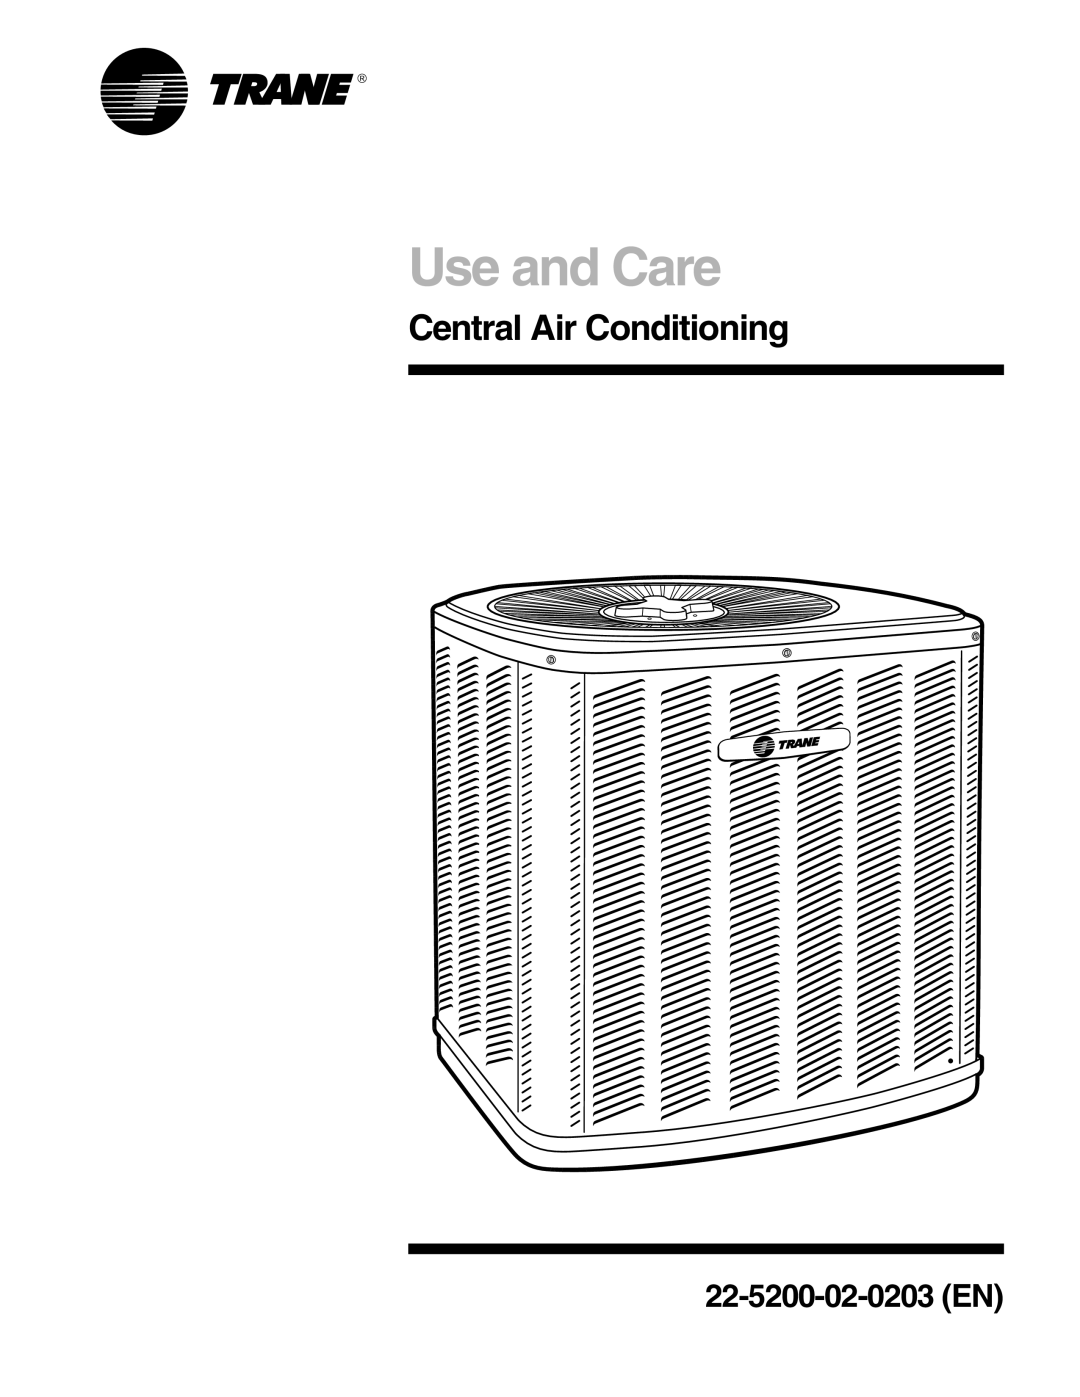 Trane XE1100, XE1200, XE1000 manual Central Air Conditioning, Use and Care, 22-5200-02-0203EN 